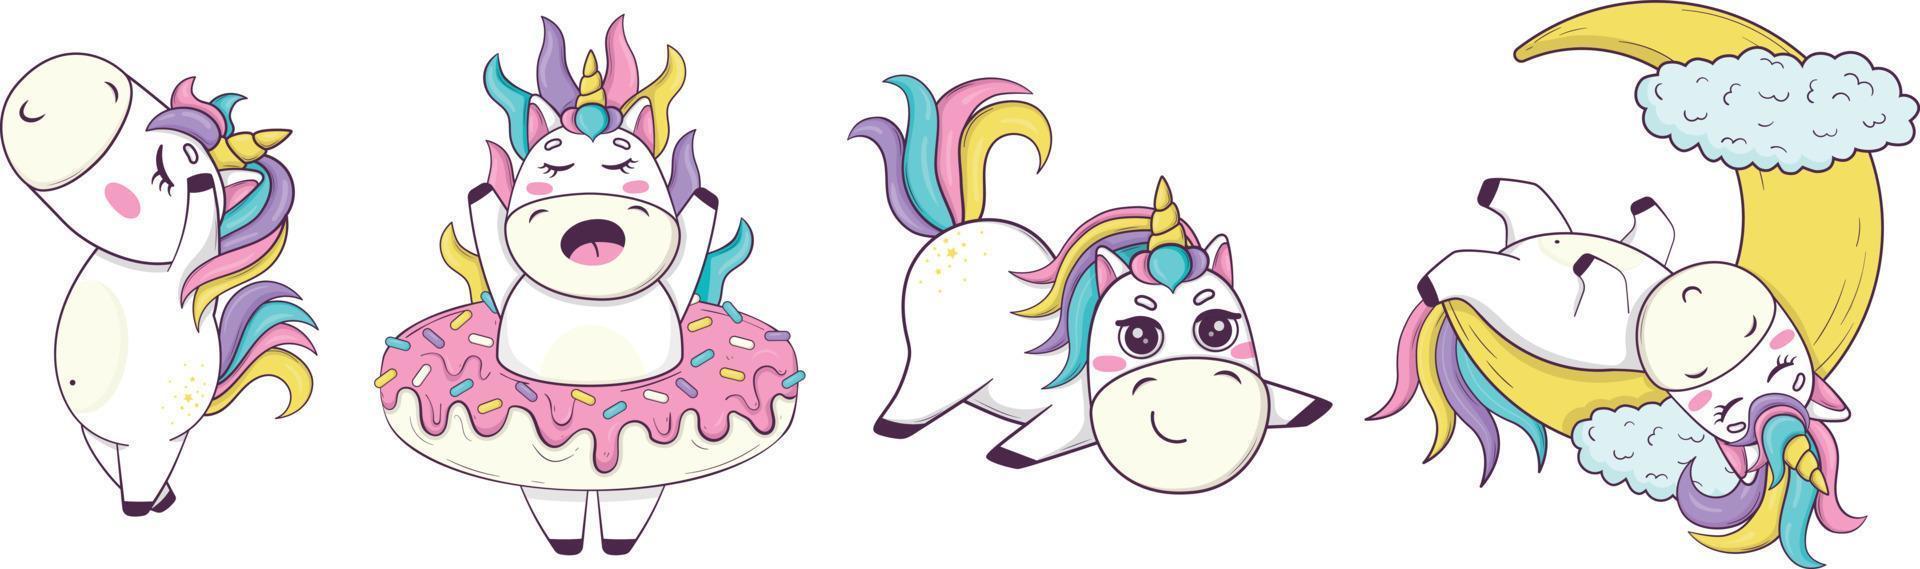 Set of funny kawaii unicorns in anime style for kids product design vector